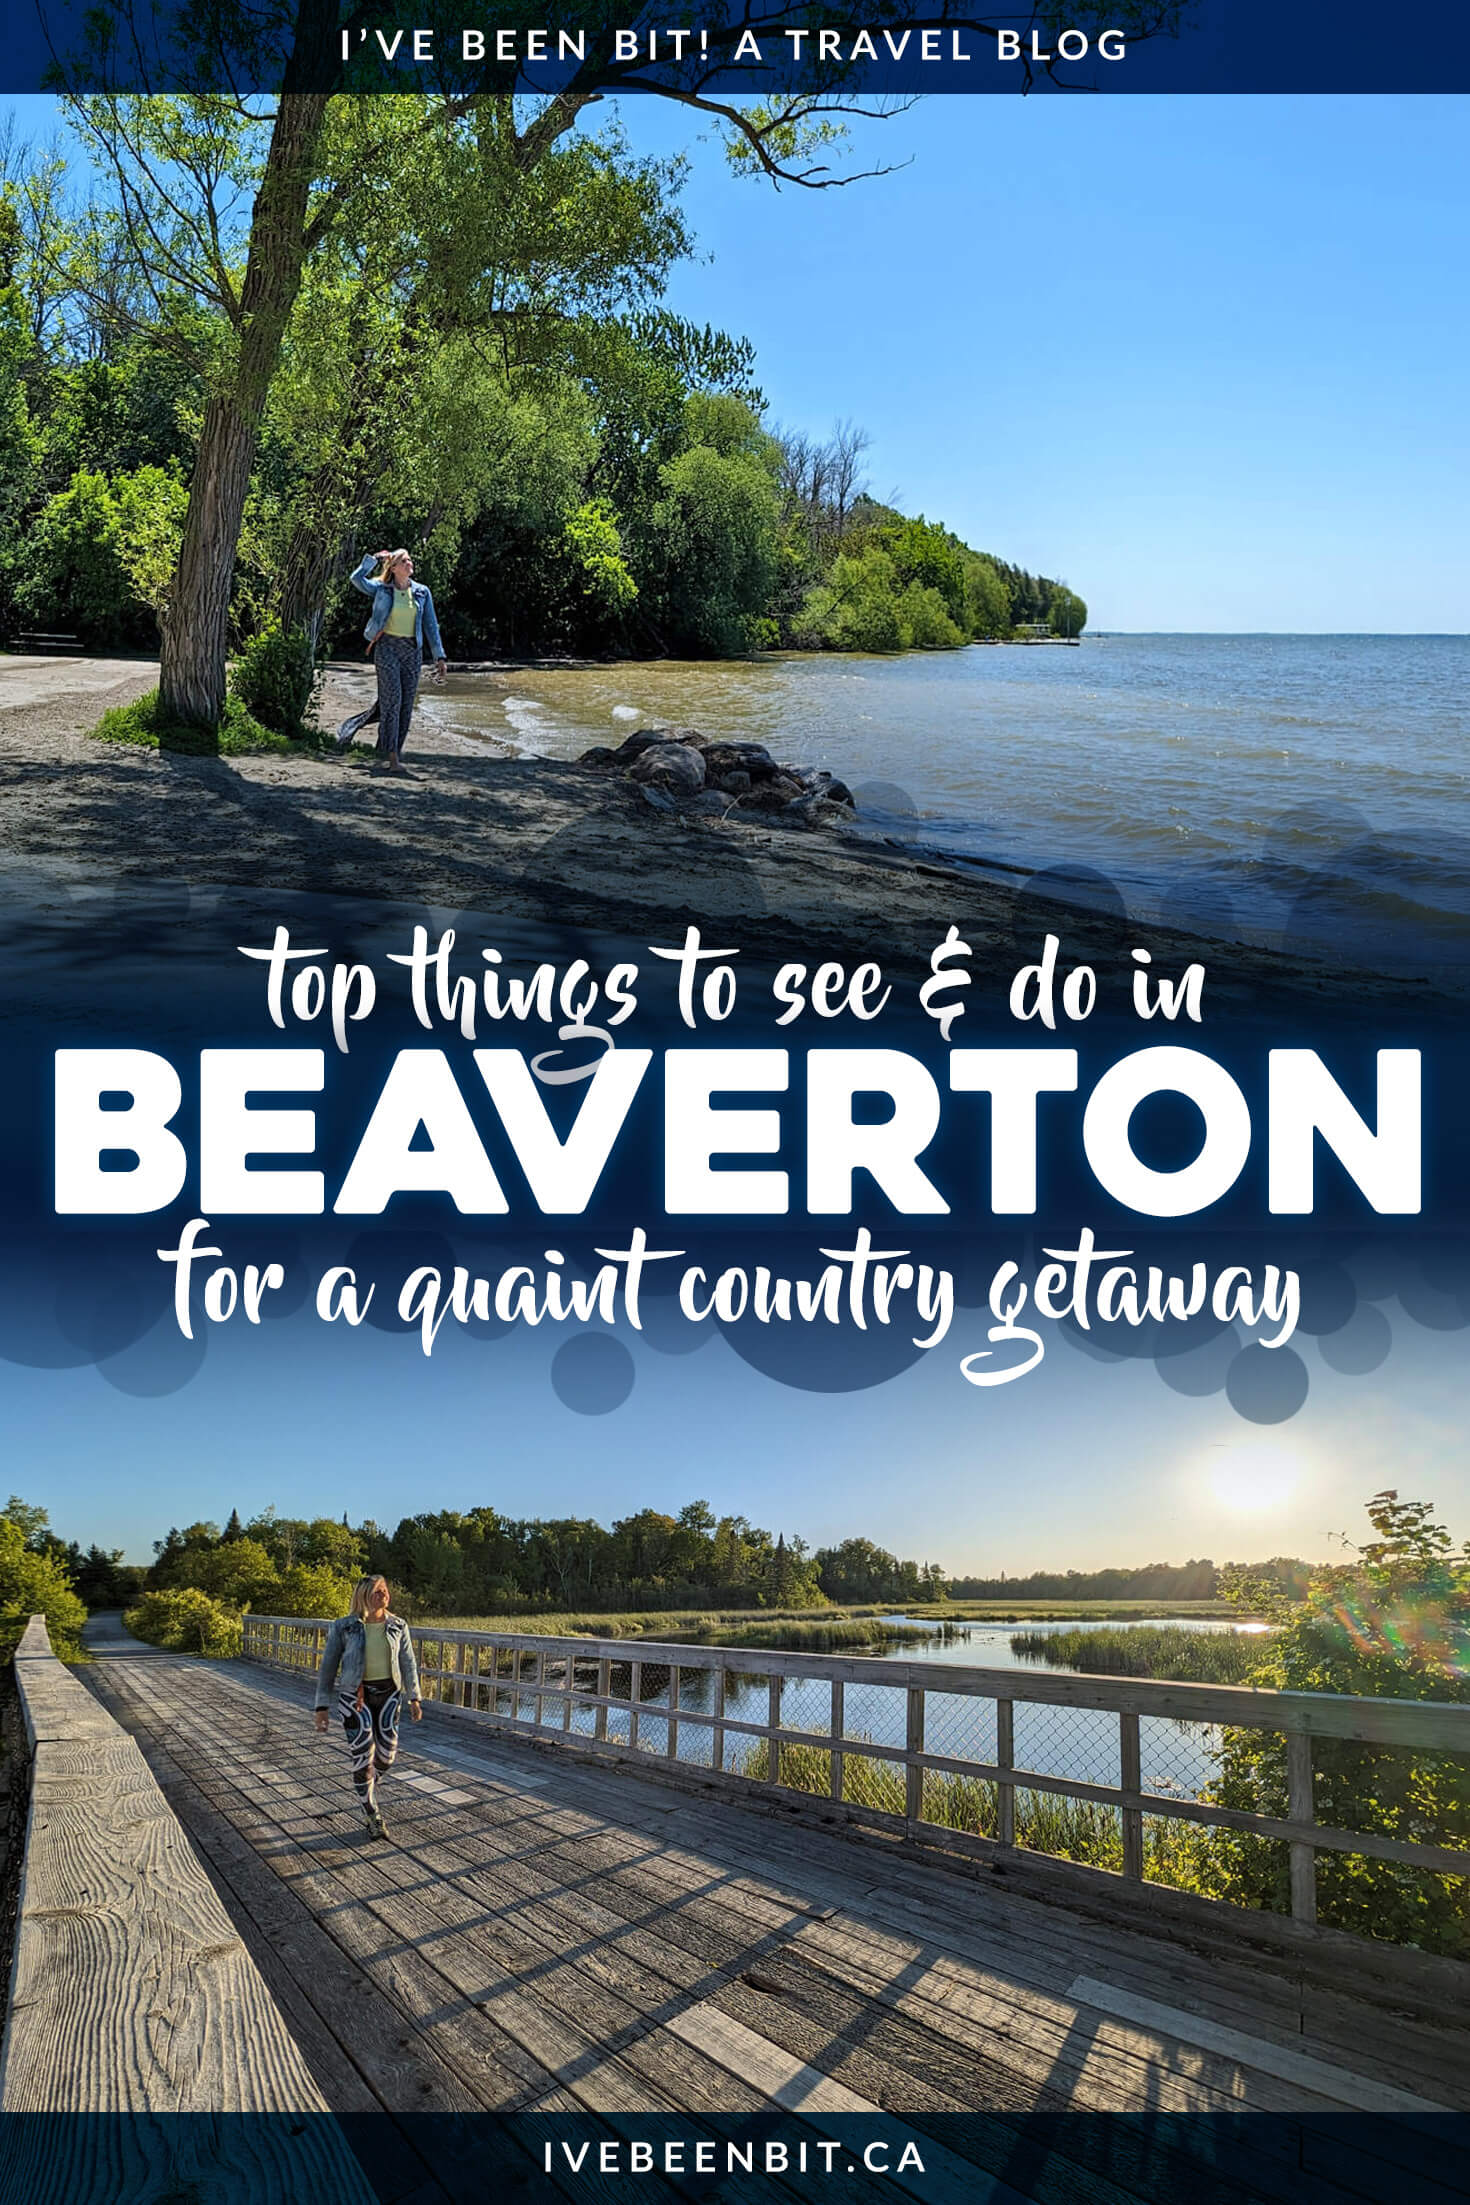 Looking to escape the city? There's no better spot than Beaverton! Check out these top things to do in Beaverton to plan your visit | Beaverton Ontario | Day Trips from Toronto | Ontario Day Trips | Ontario Weekend Getaways | Weekend Getaways in Ontario | Weekend Getaways from Toronto | Ontario Road Trips | Road Trips in Ontario | IveBeenBit.ca